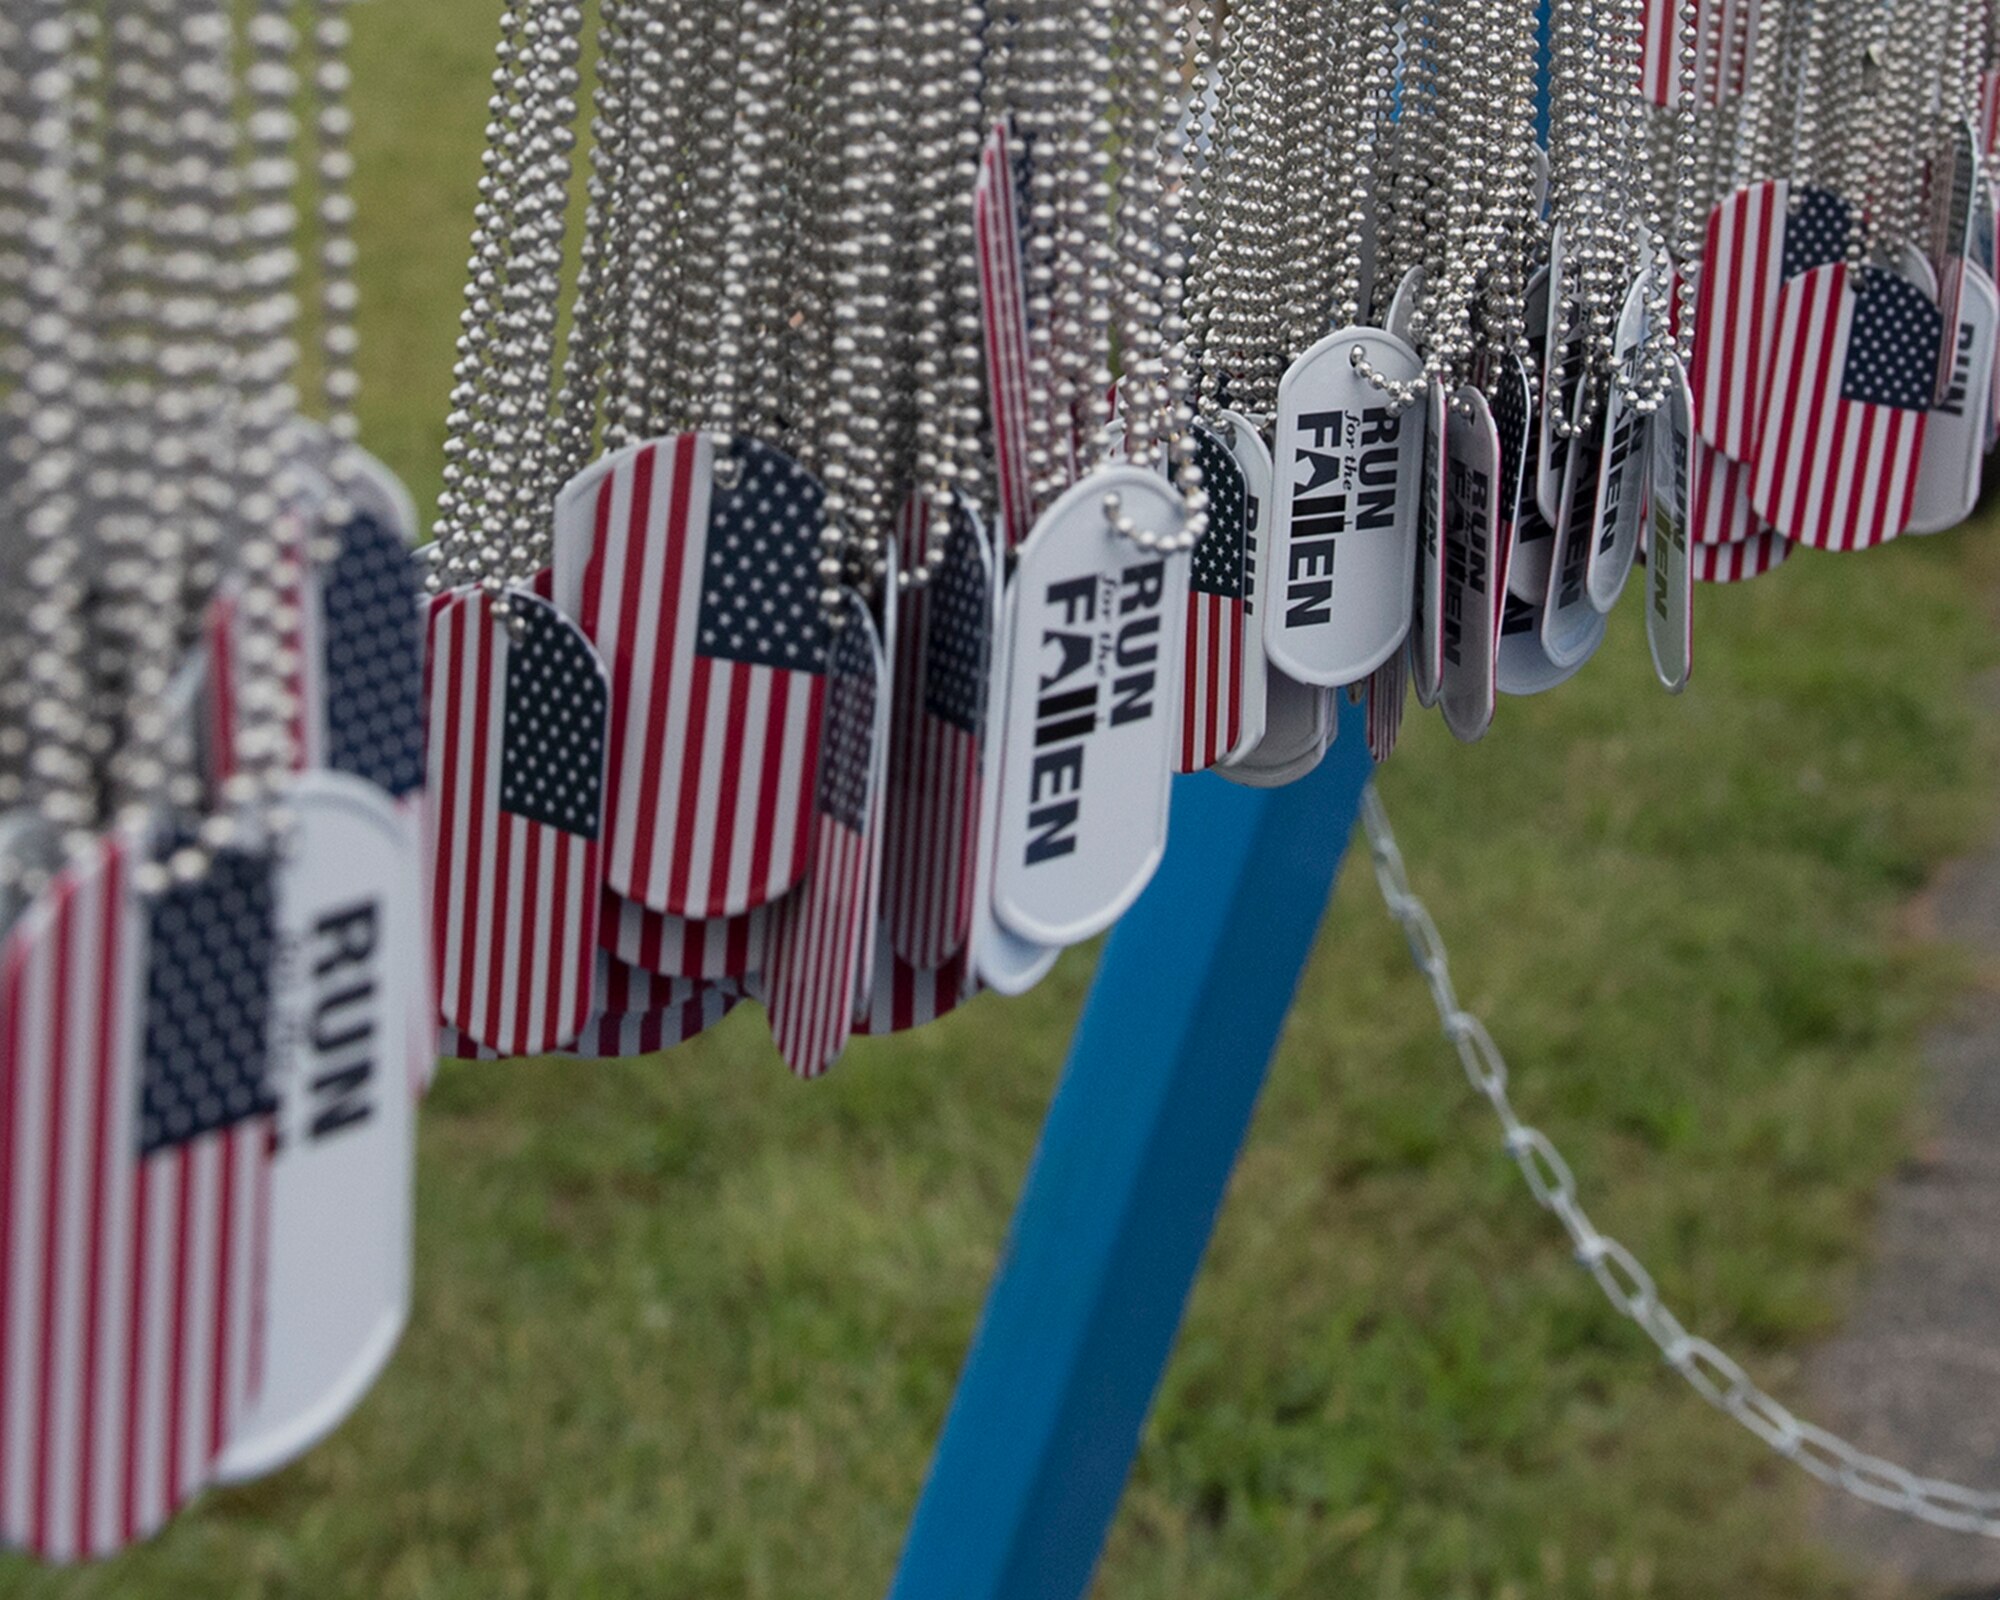 Run for the Fallen medallions hang from a stand at Wright-Patterson Air Force Base, Ohio, Sept. 11, 2018. The medallions were given to runners to mark the 17th anniversary of the 9/11 terrorist attacks. (U.S. Air Force photo by Michelle Gigante)